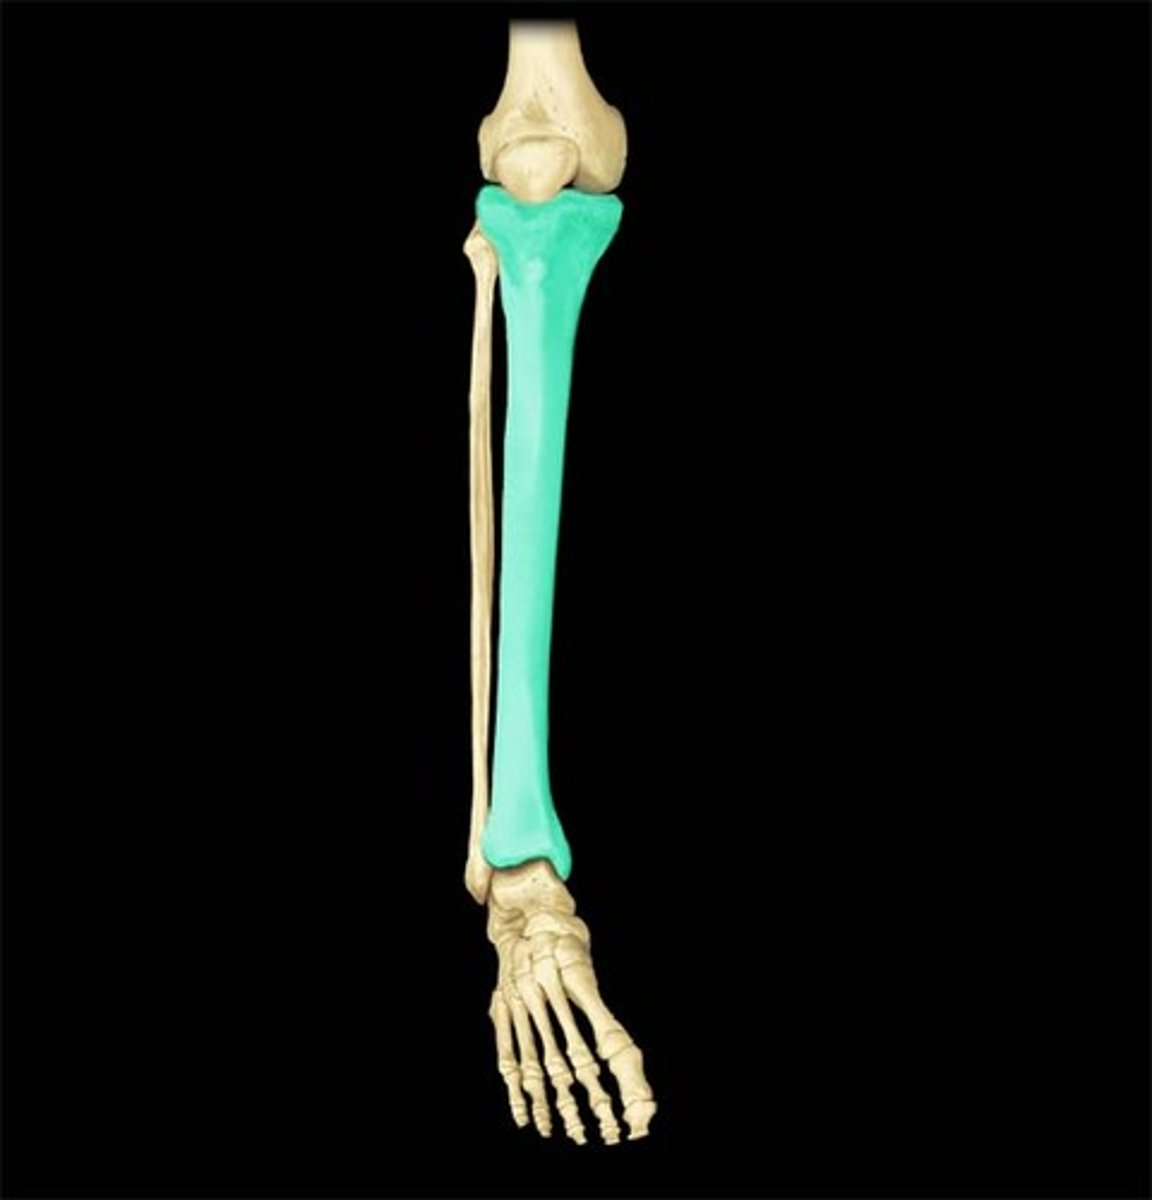 <p>- more medial, larger and stronger</p><p>- tibiofemoral joint and proximal tibiofibular joint(similar to ulna nad radius)</p><p>- distal tibiofibular joint and tibiotalar joint(with talas bone in foot)</p><p>- medial malleolus(bump on ankle)</p>